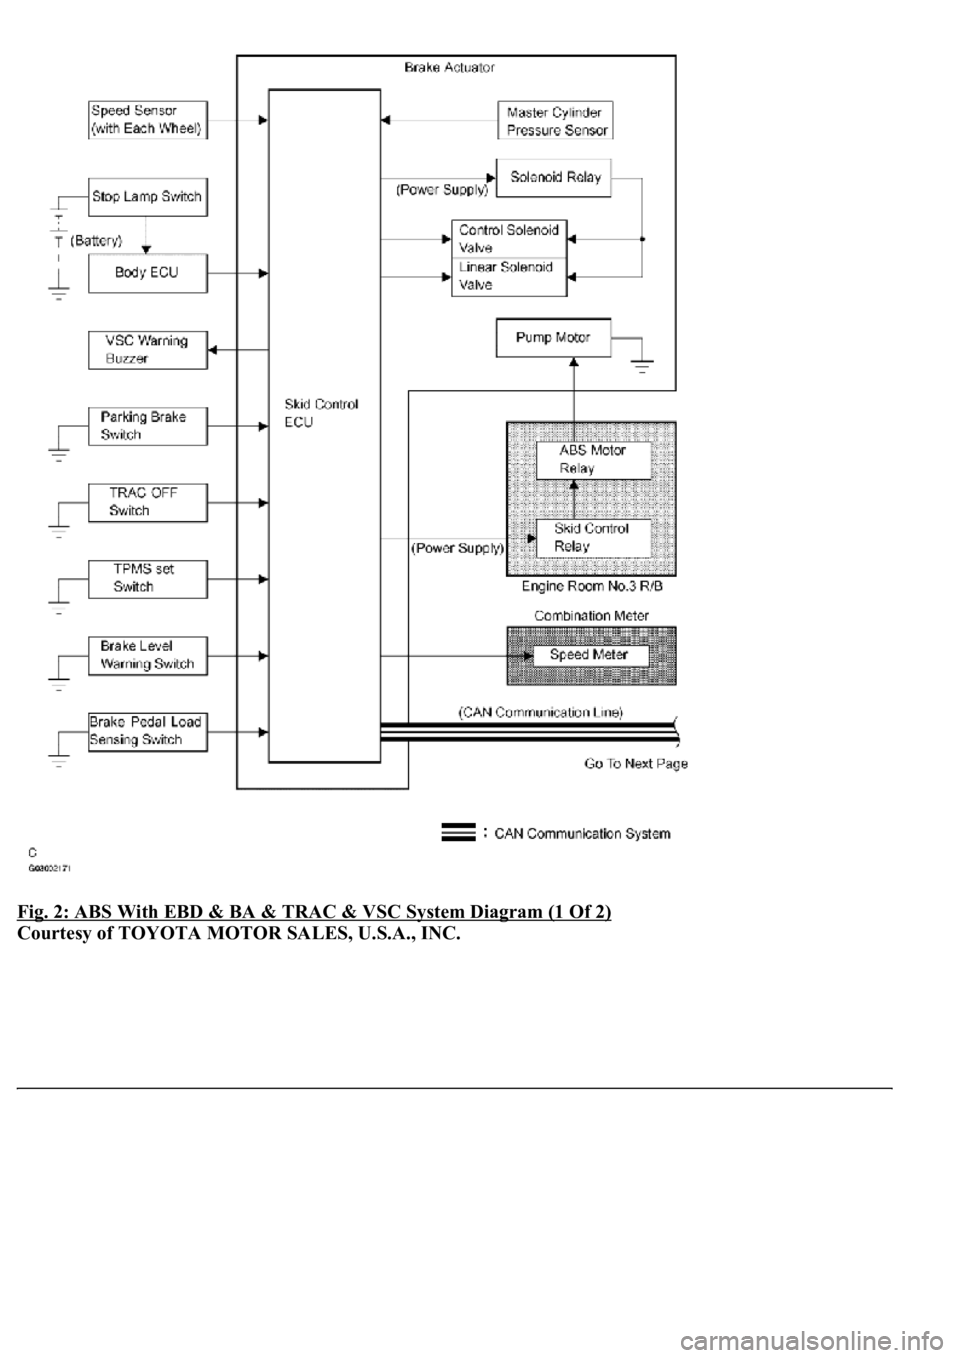 LEXUS LS430 2003  Factory Repair Manual Fig. 2: ABS With EBD & BA & TRAC & VSC System Diagram (1 Of 2) 
Courtesy of TOYOTA MOTOR SALES, U.S.A., INC. 